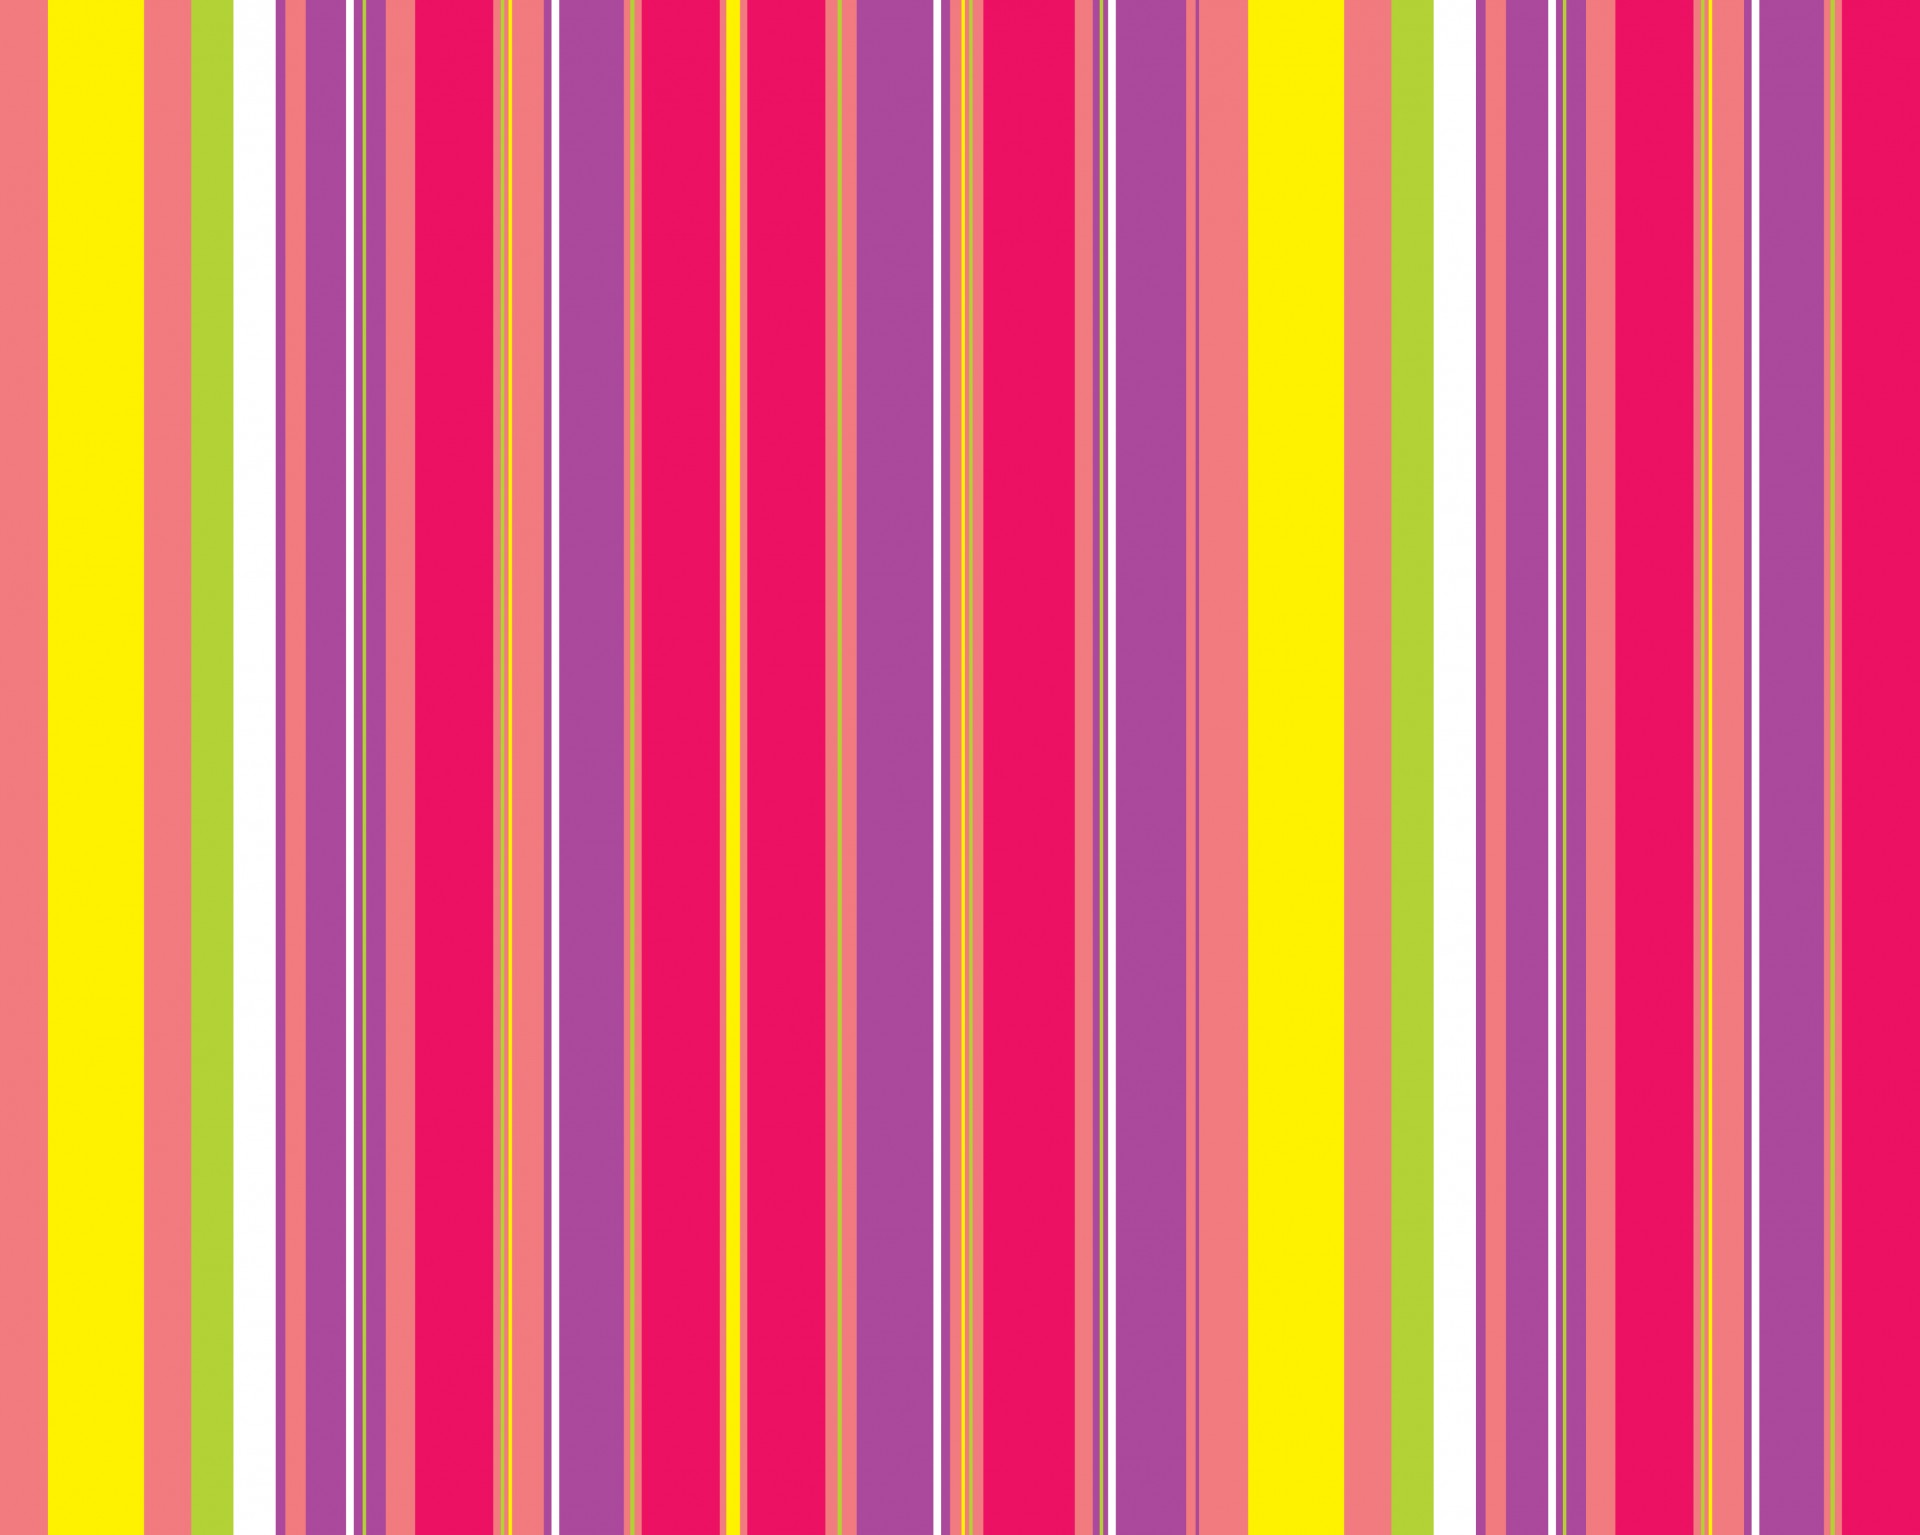 Stripes Striped Background Wallpaper Paper Free Image From Needpix Com